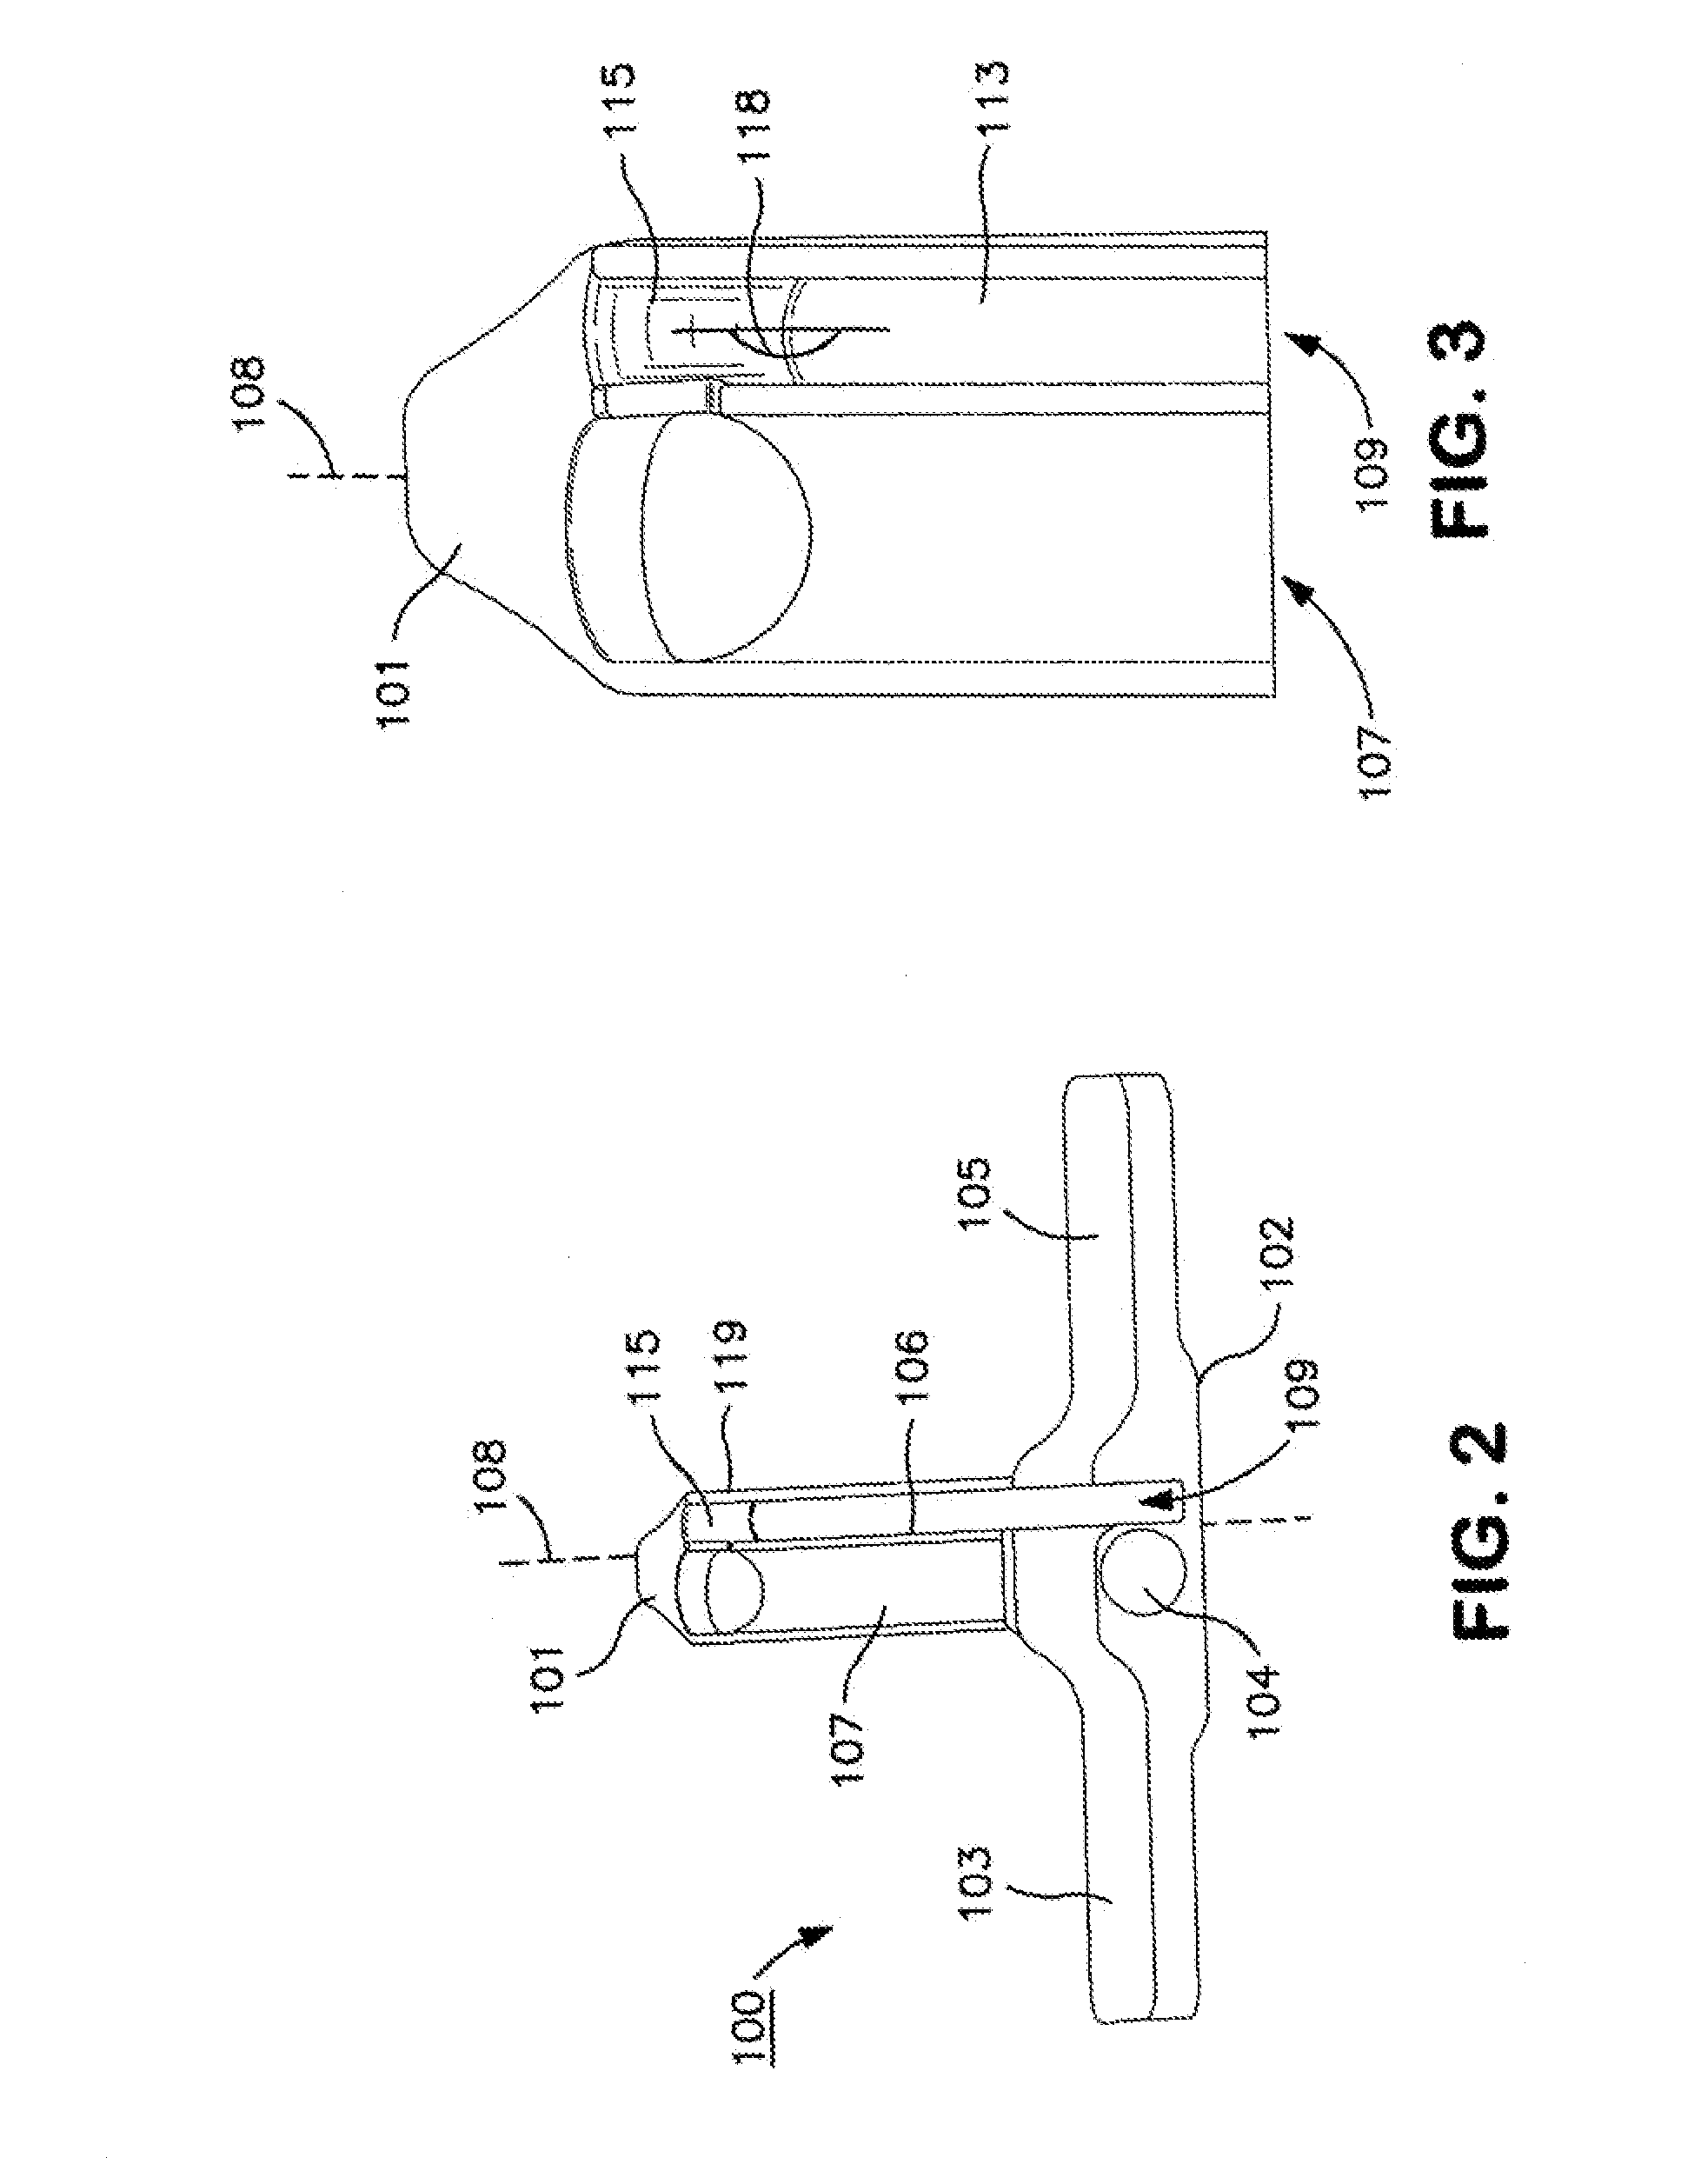 Method and Apparatus for Endoscopic Ligament Release